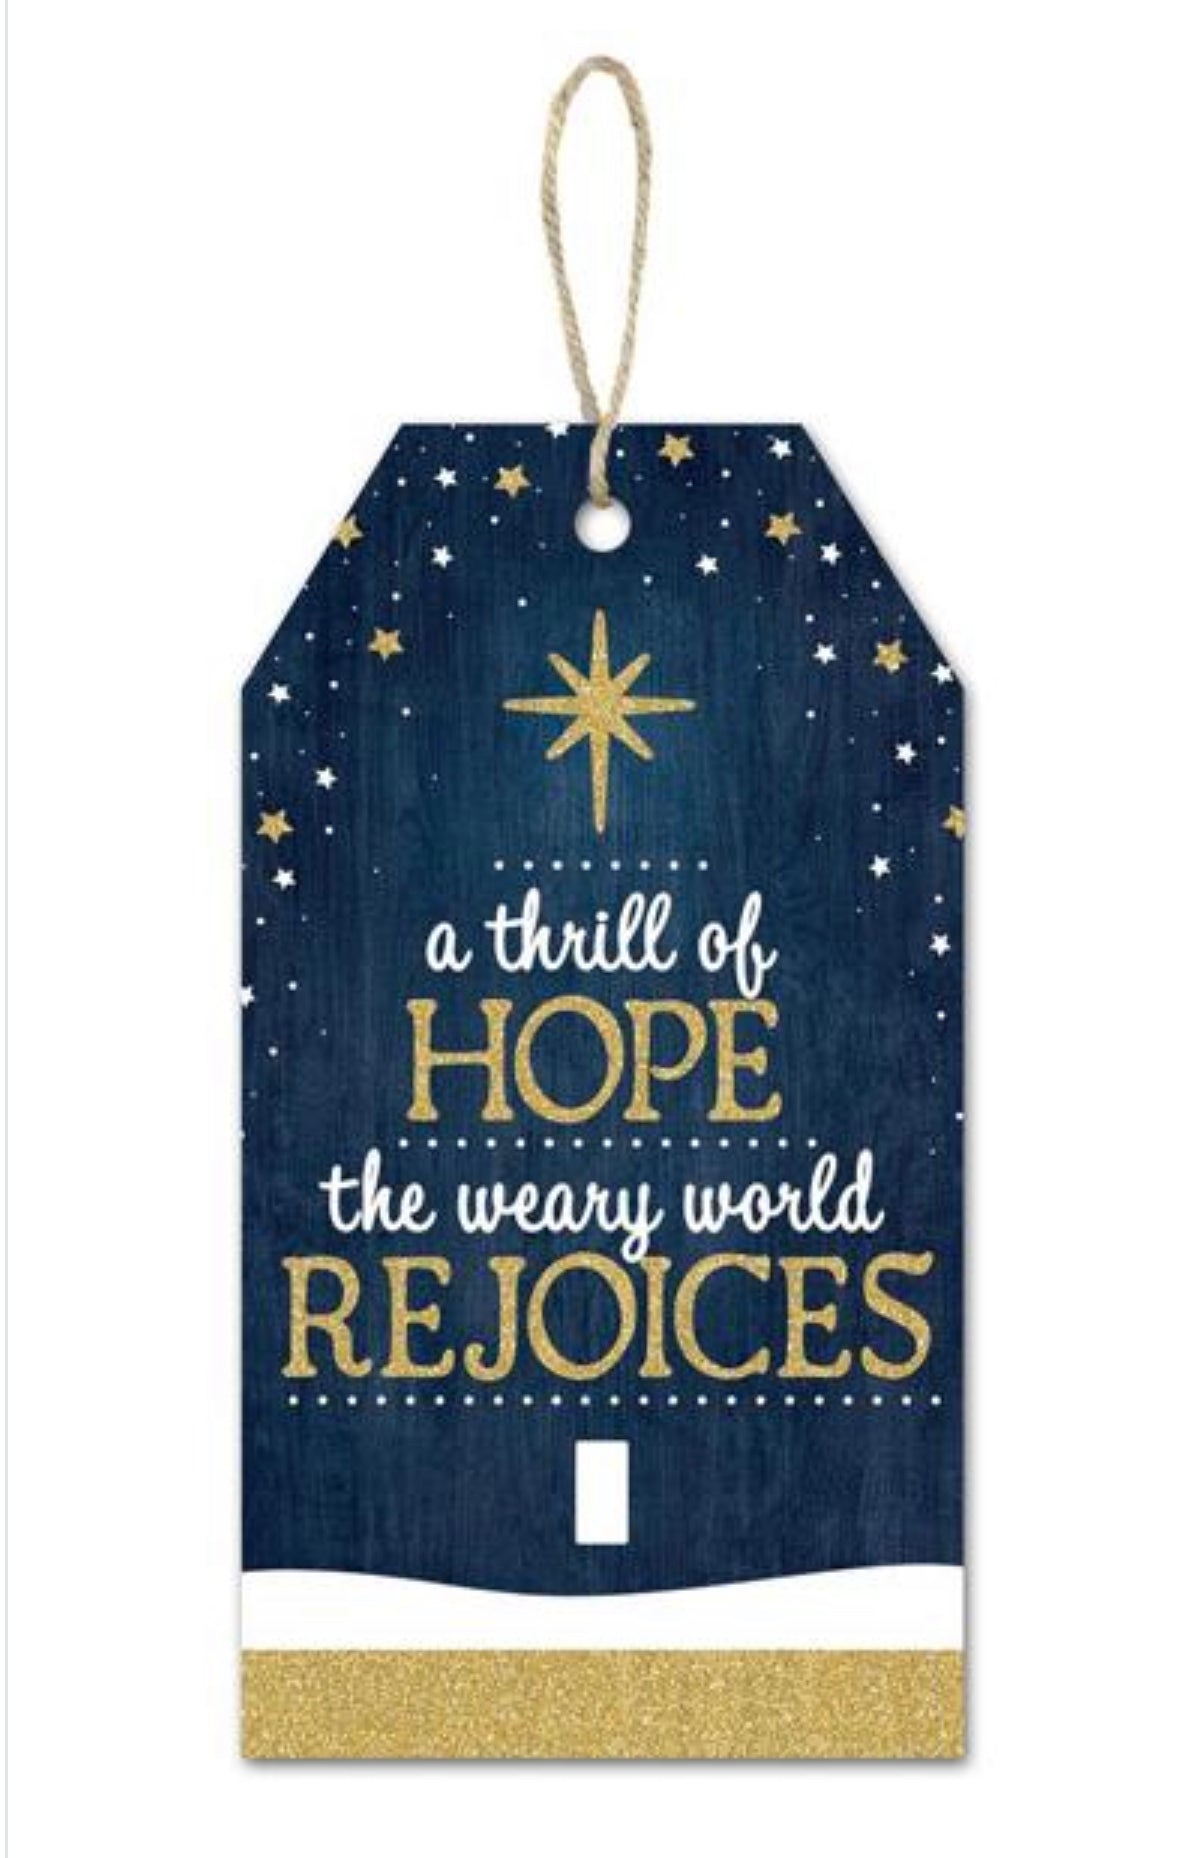 Thrill of hope glittered Christmas tag sign - Greenery Marketsigns for wreathsAP7806